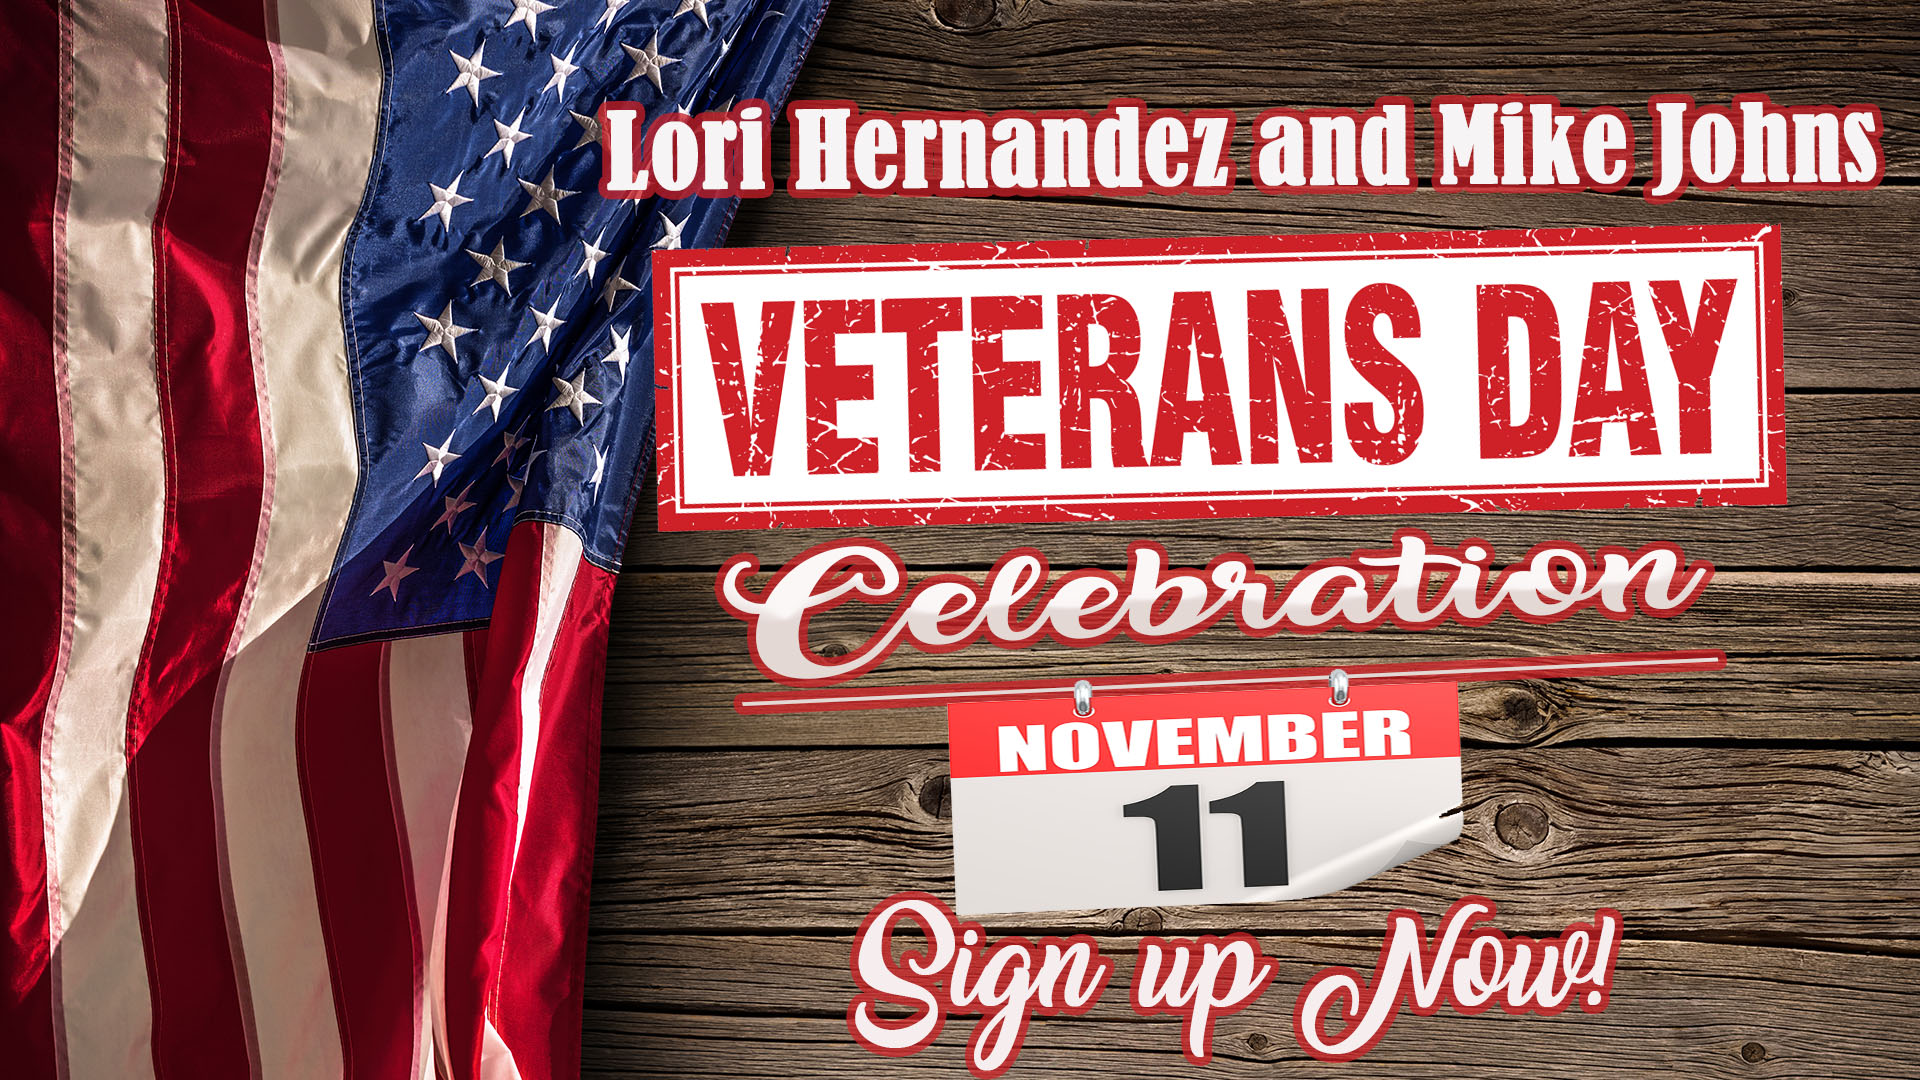 Veterans Day Class with Lori Hernandez and Mike Johns